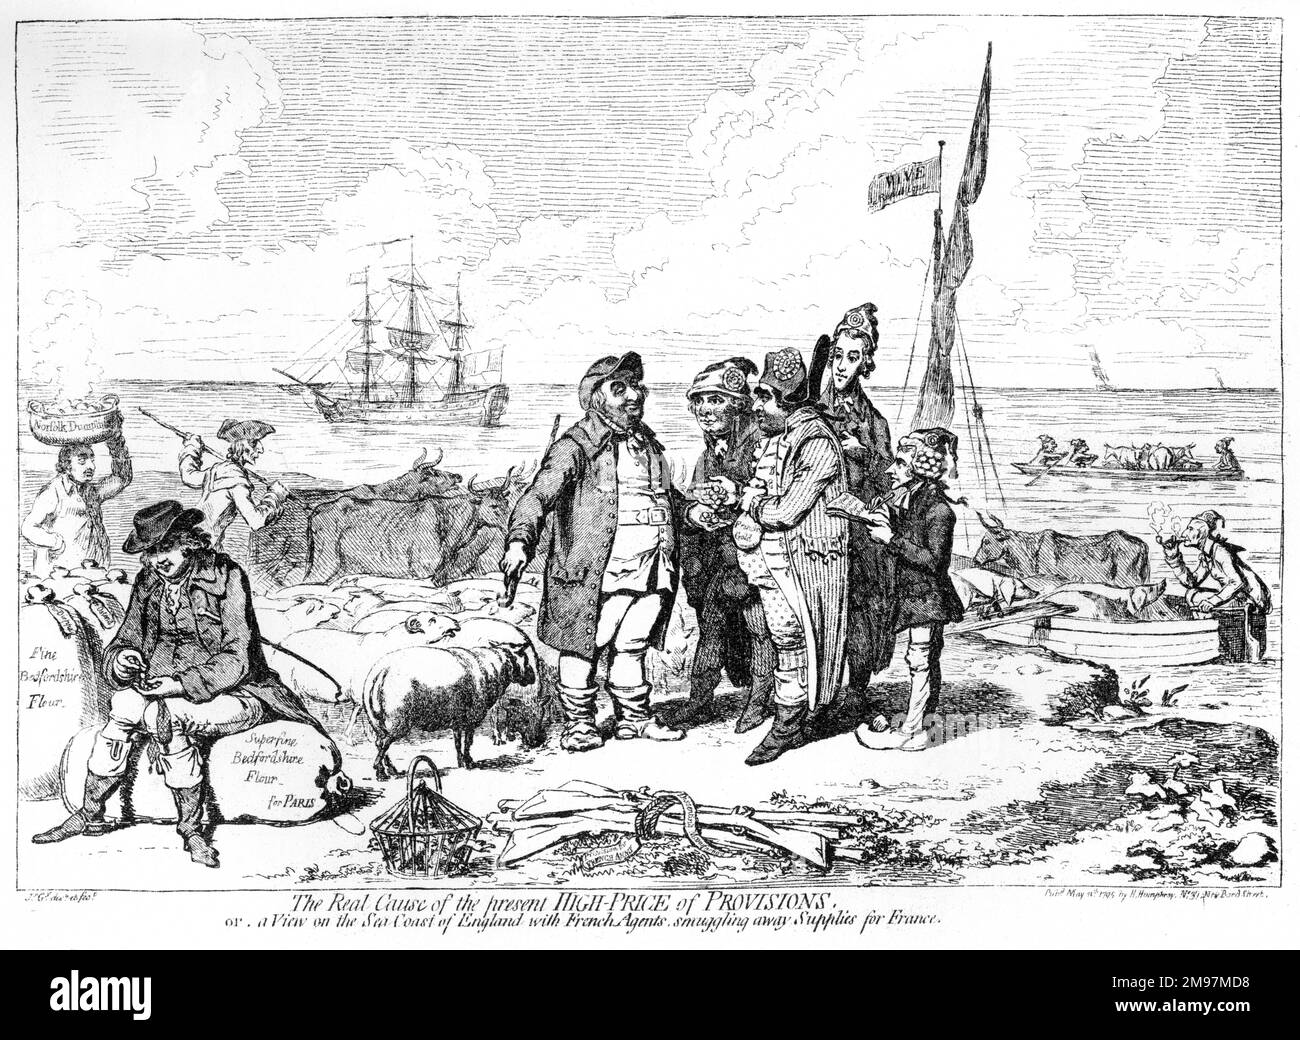 Cartoon, The Real Cause of the present High Price of Provisions, or, a View on the Sea Coast of England with French Agents smuggling away Supplies for France. Showing Charles James Fox, Richard Brinsley Sheridan and Whig landowners selling flour and livestock to the French, who are suffering a food shortage due to a naval blockade towards the end of the French Revolution. Stock Photo